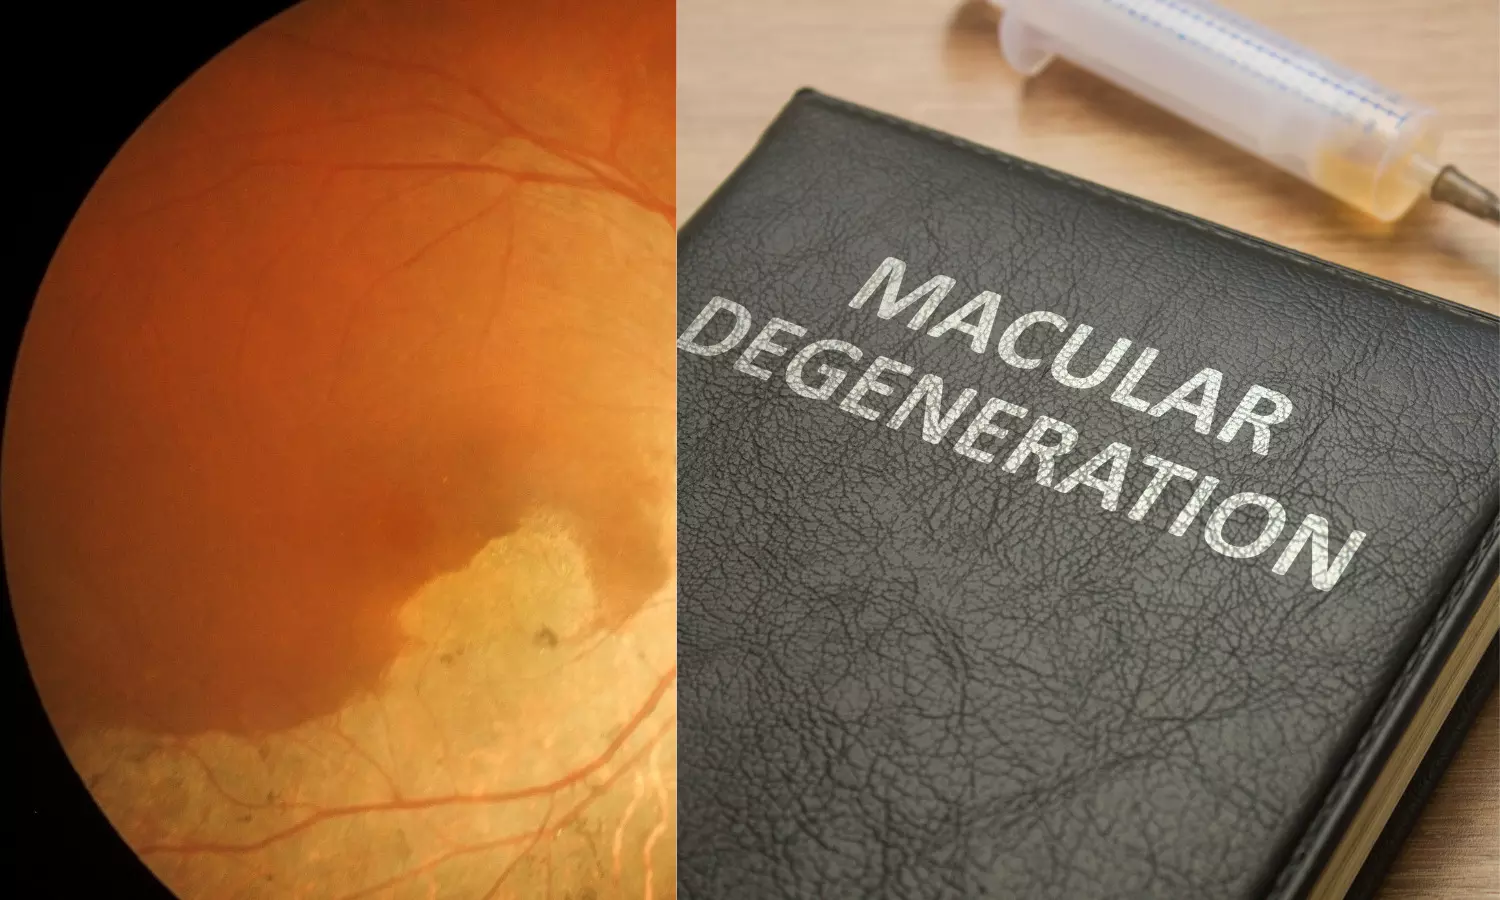 Increased intake of dietary calcium reduces risk of Age-related macular degeneration